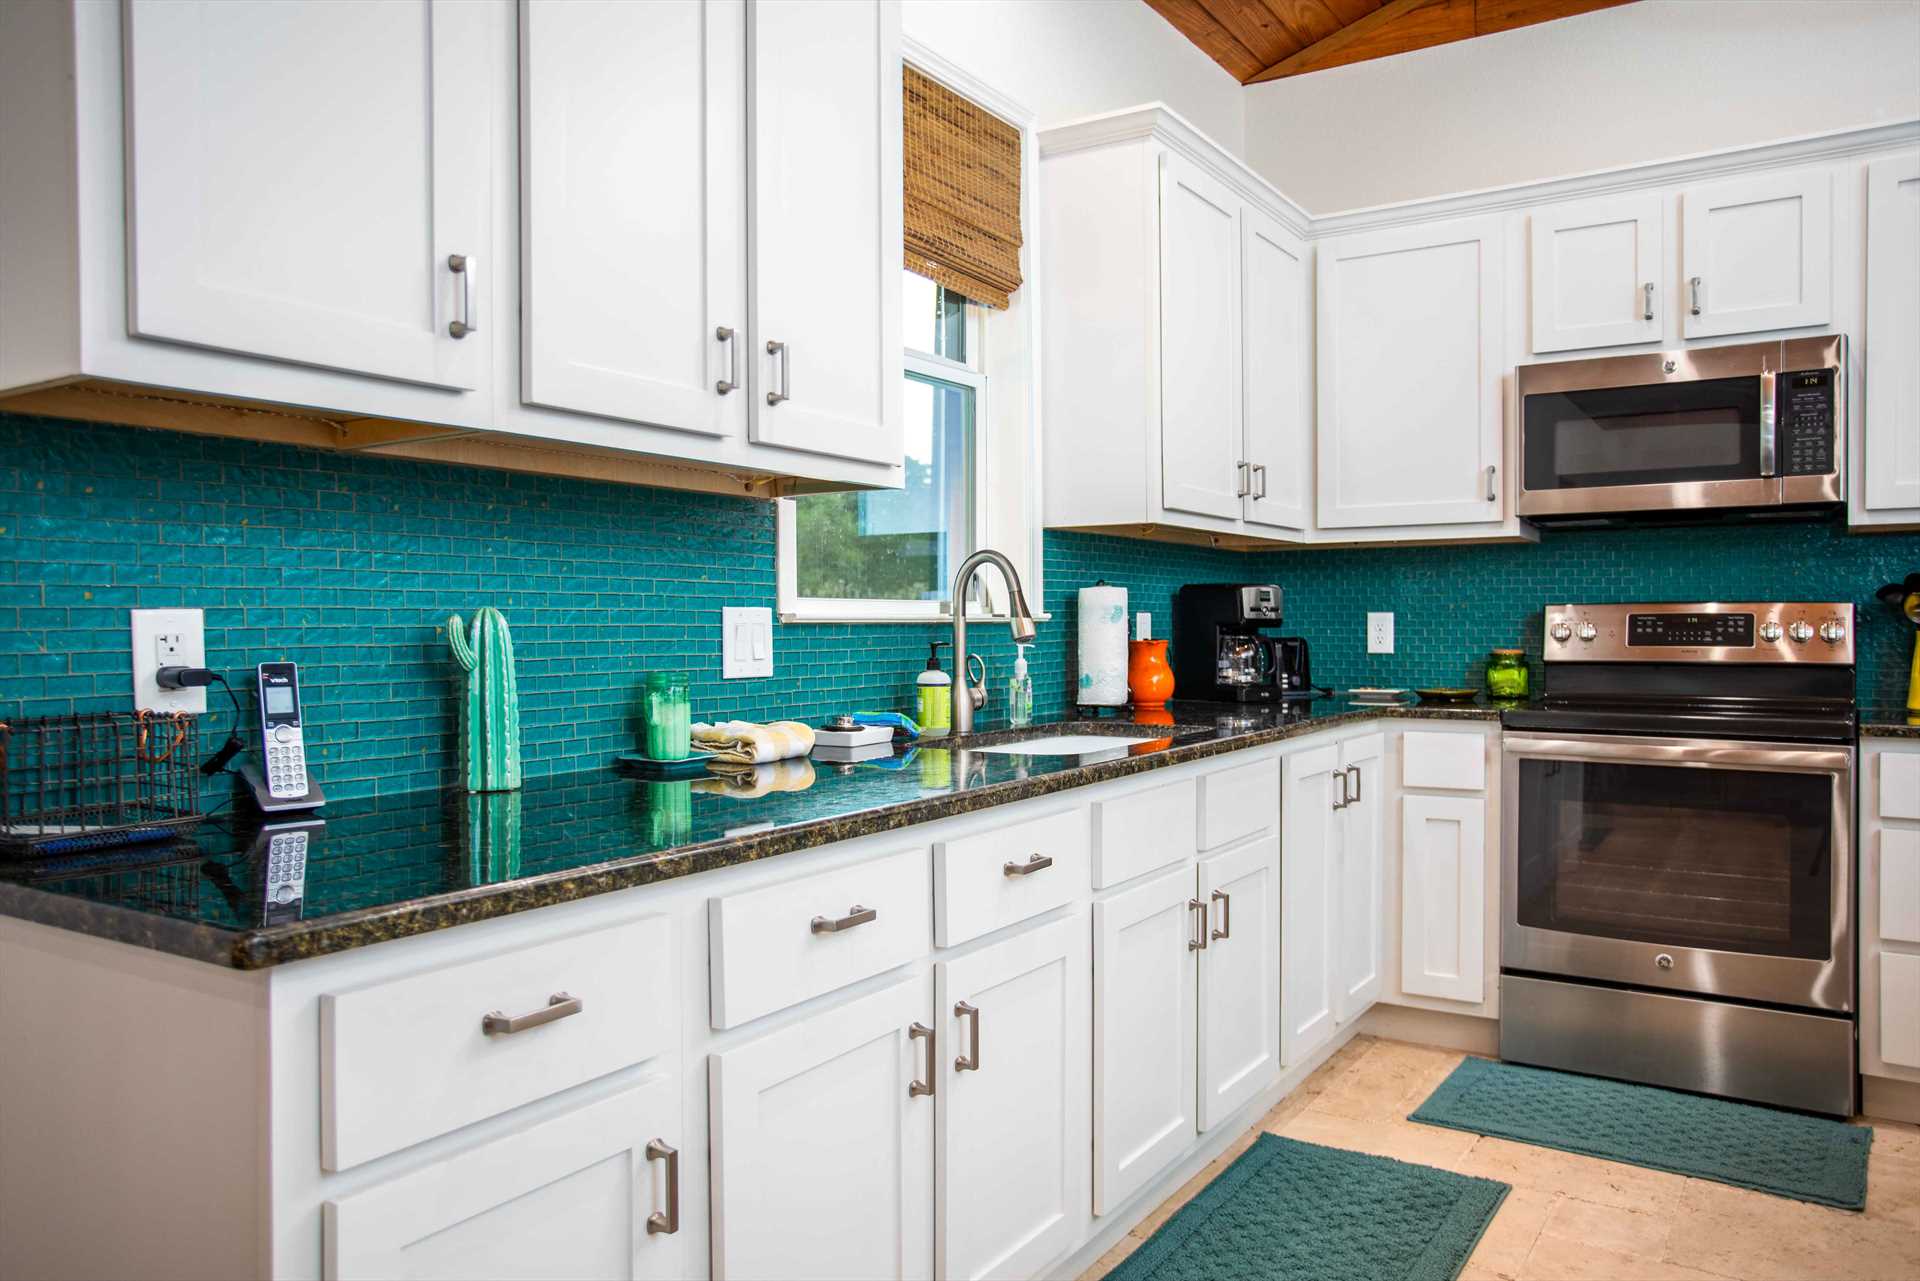                                                 The full kitchen features modern appliances and plenty of cooking ware, serving, ware, utensils, and even spices!